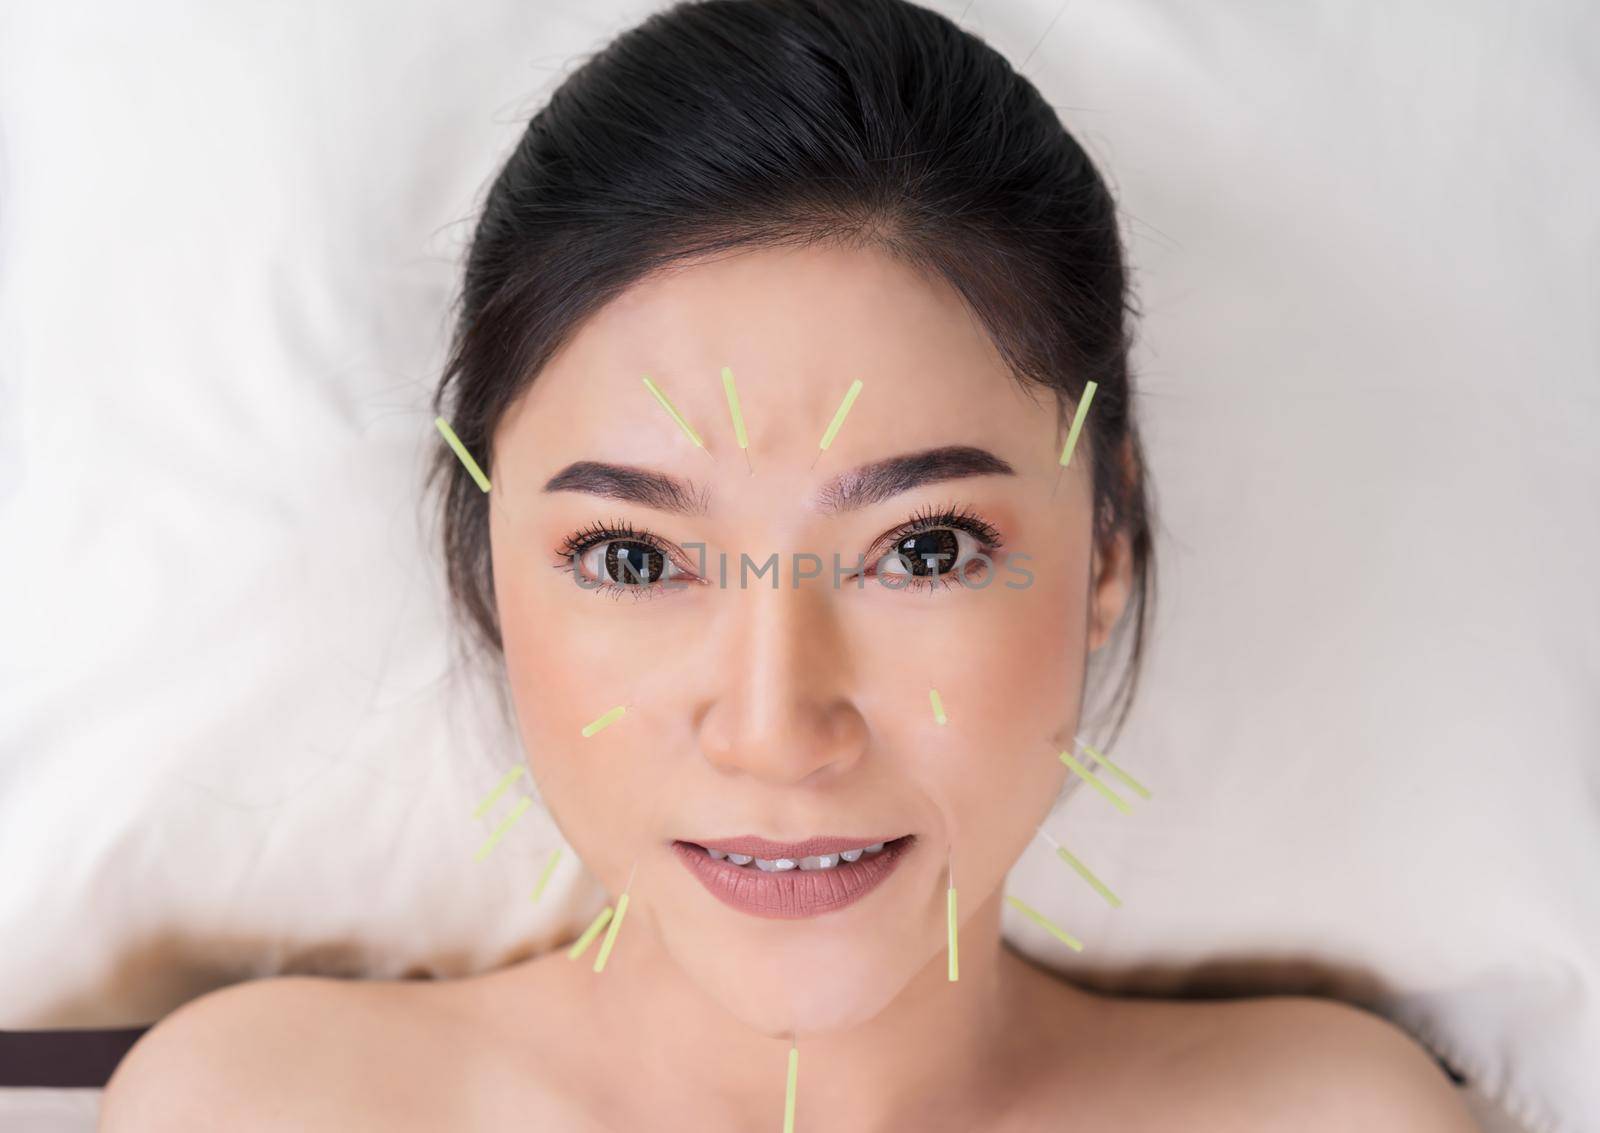 woman undergoing acupuncture treatment on face by geargodz